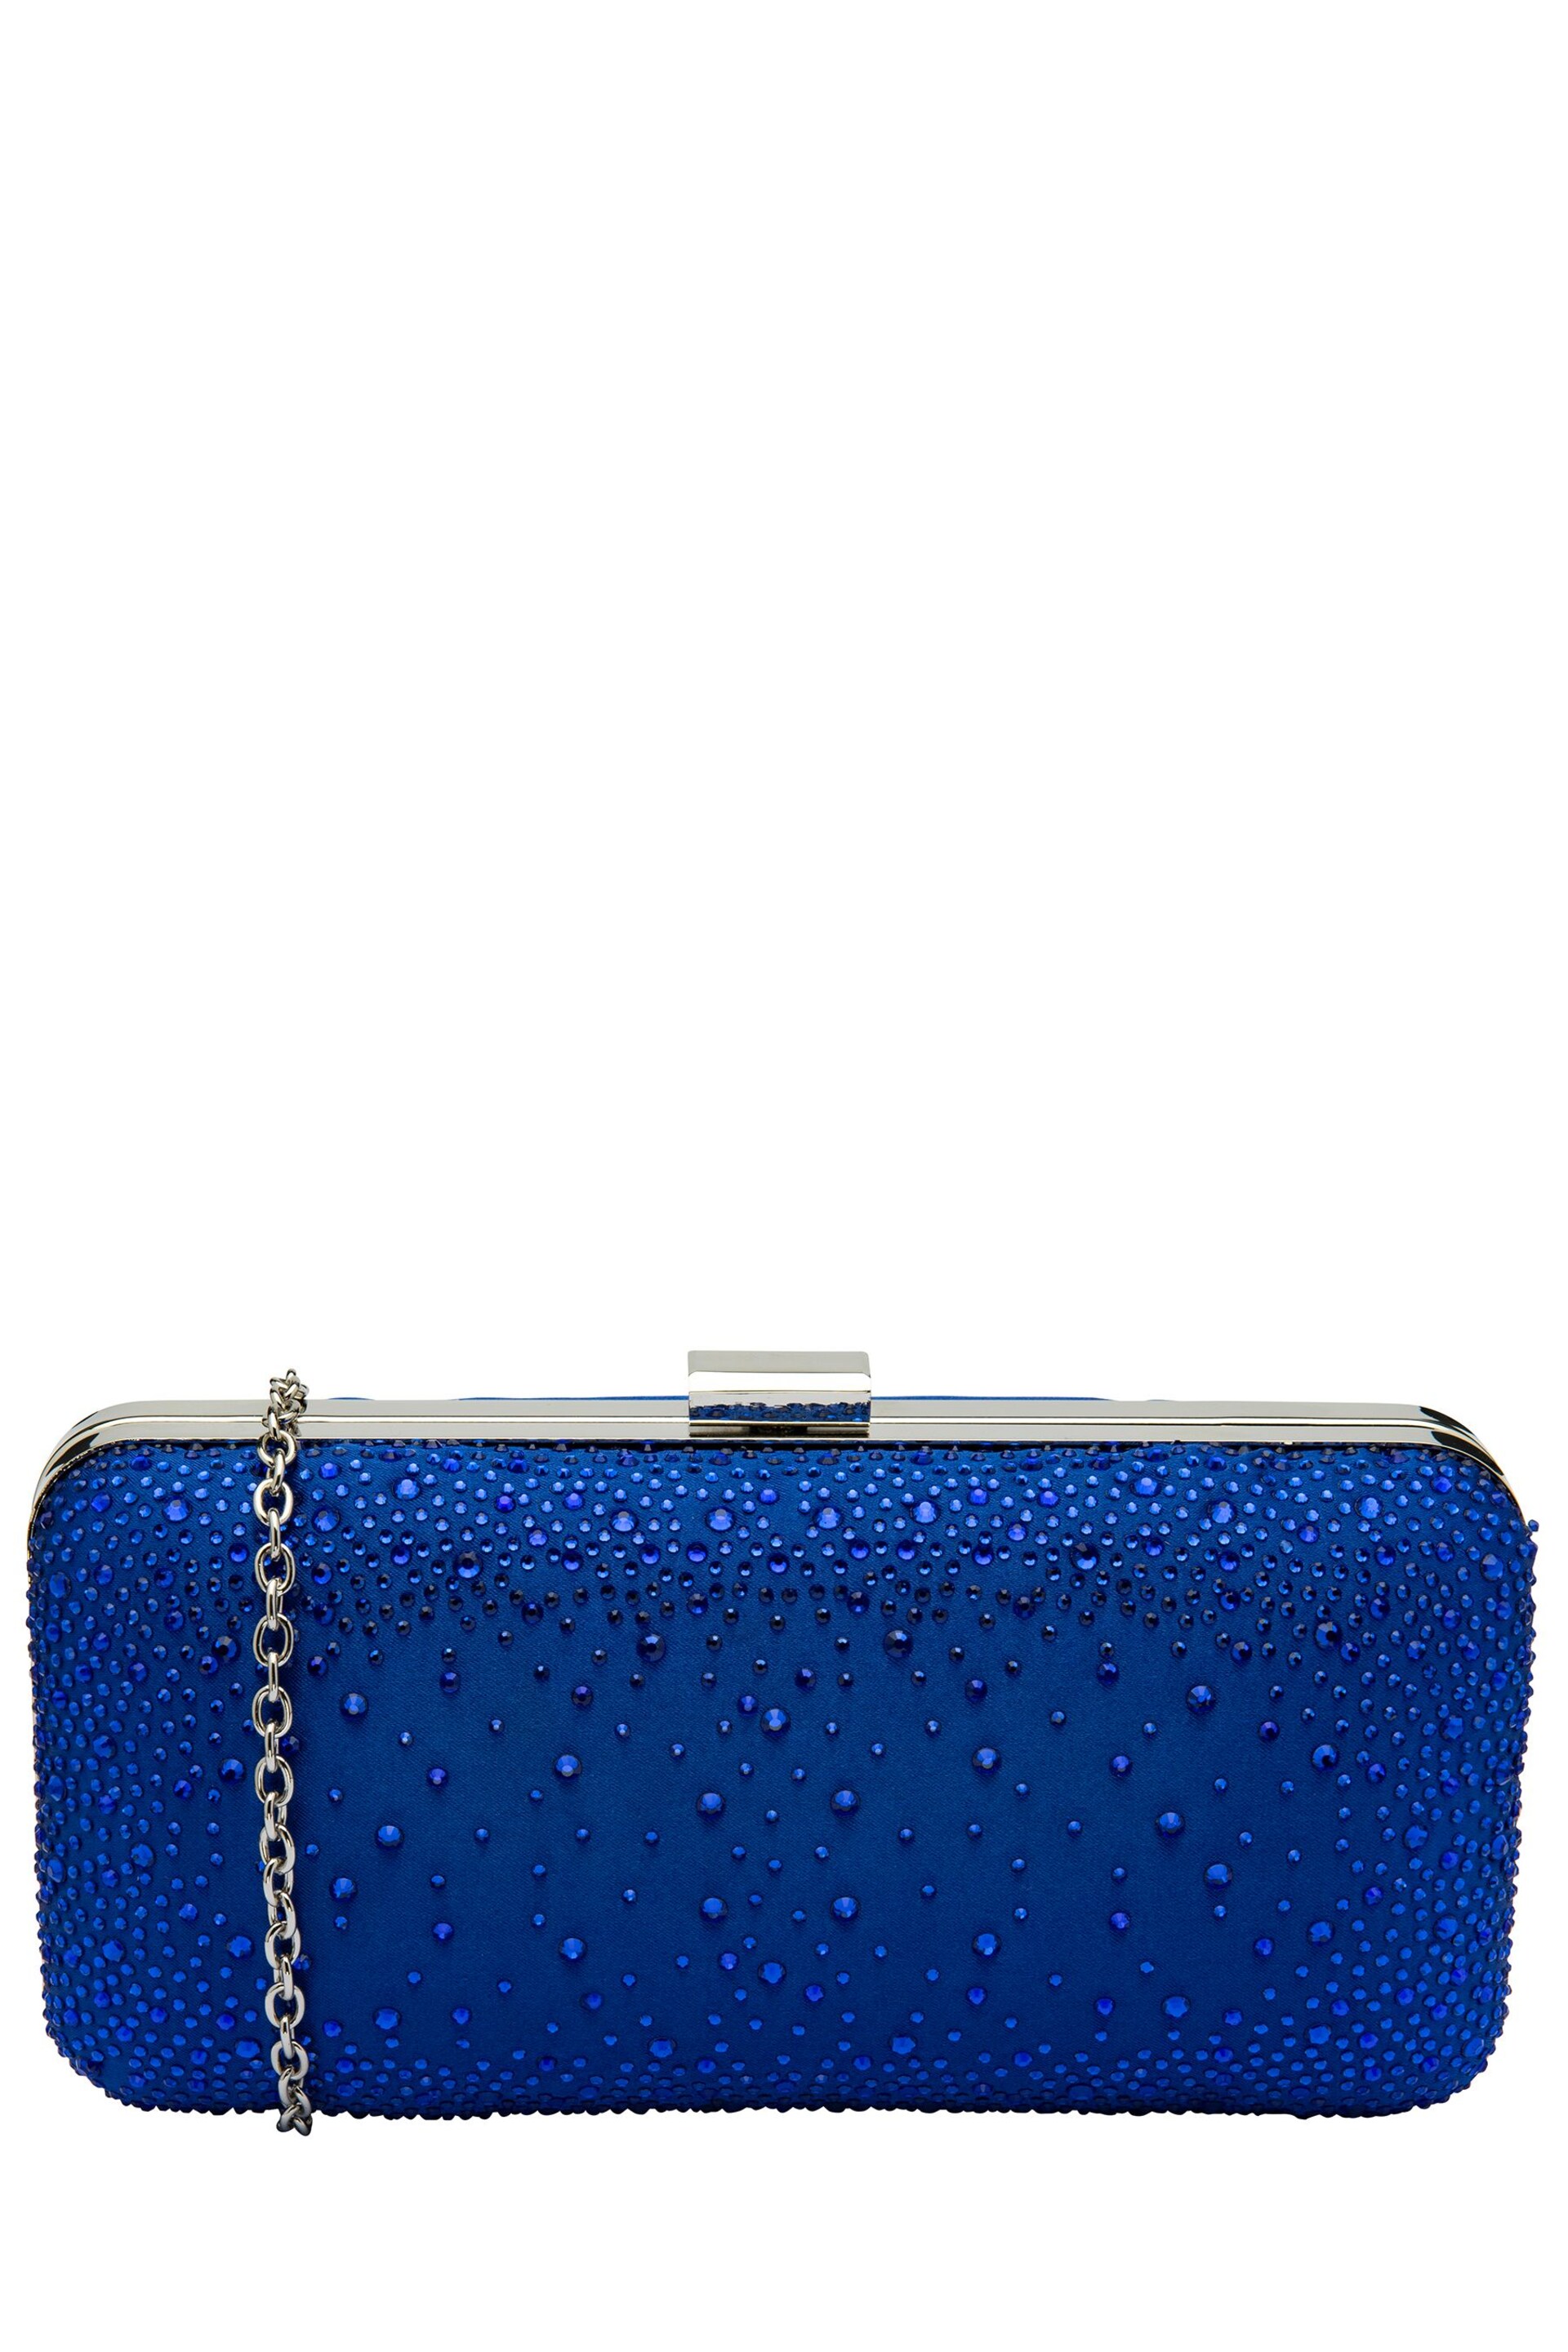 Lotus Blue Clutch Bag with Chain - Image 1 of 4